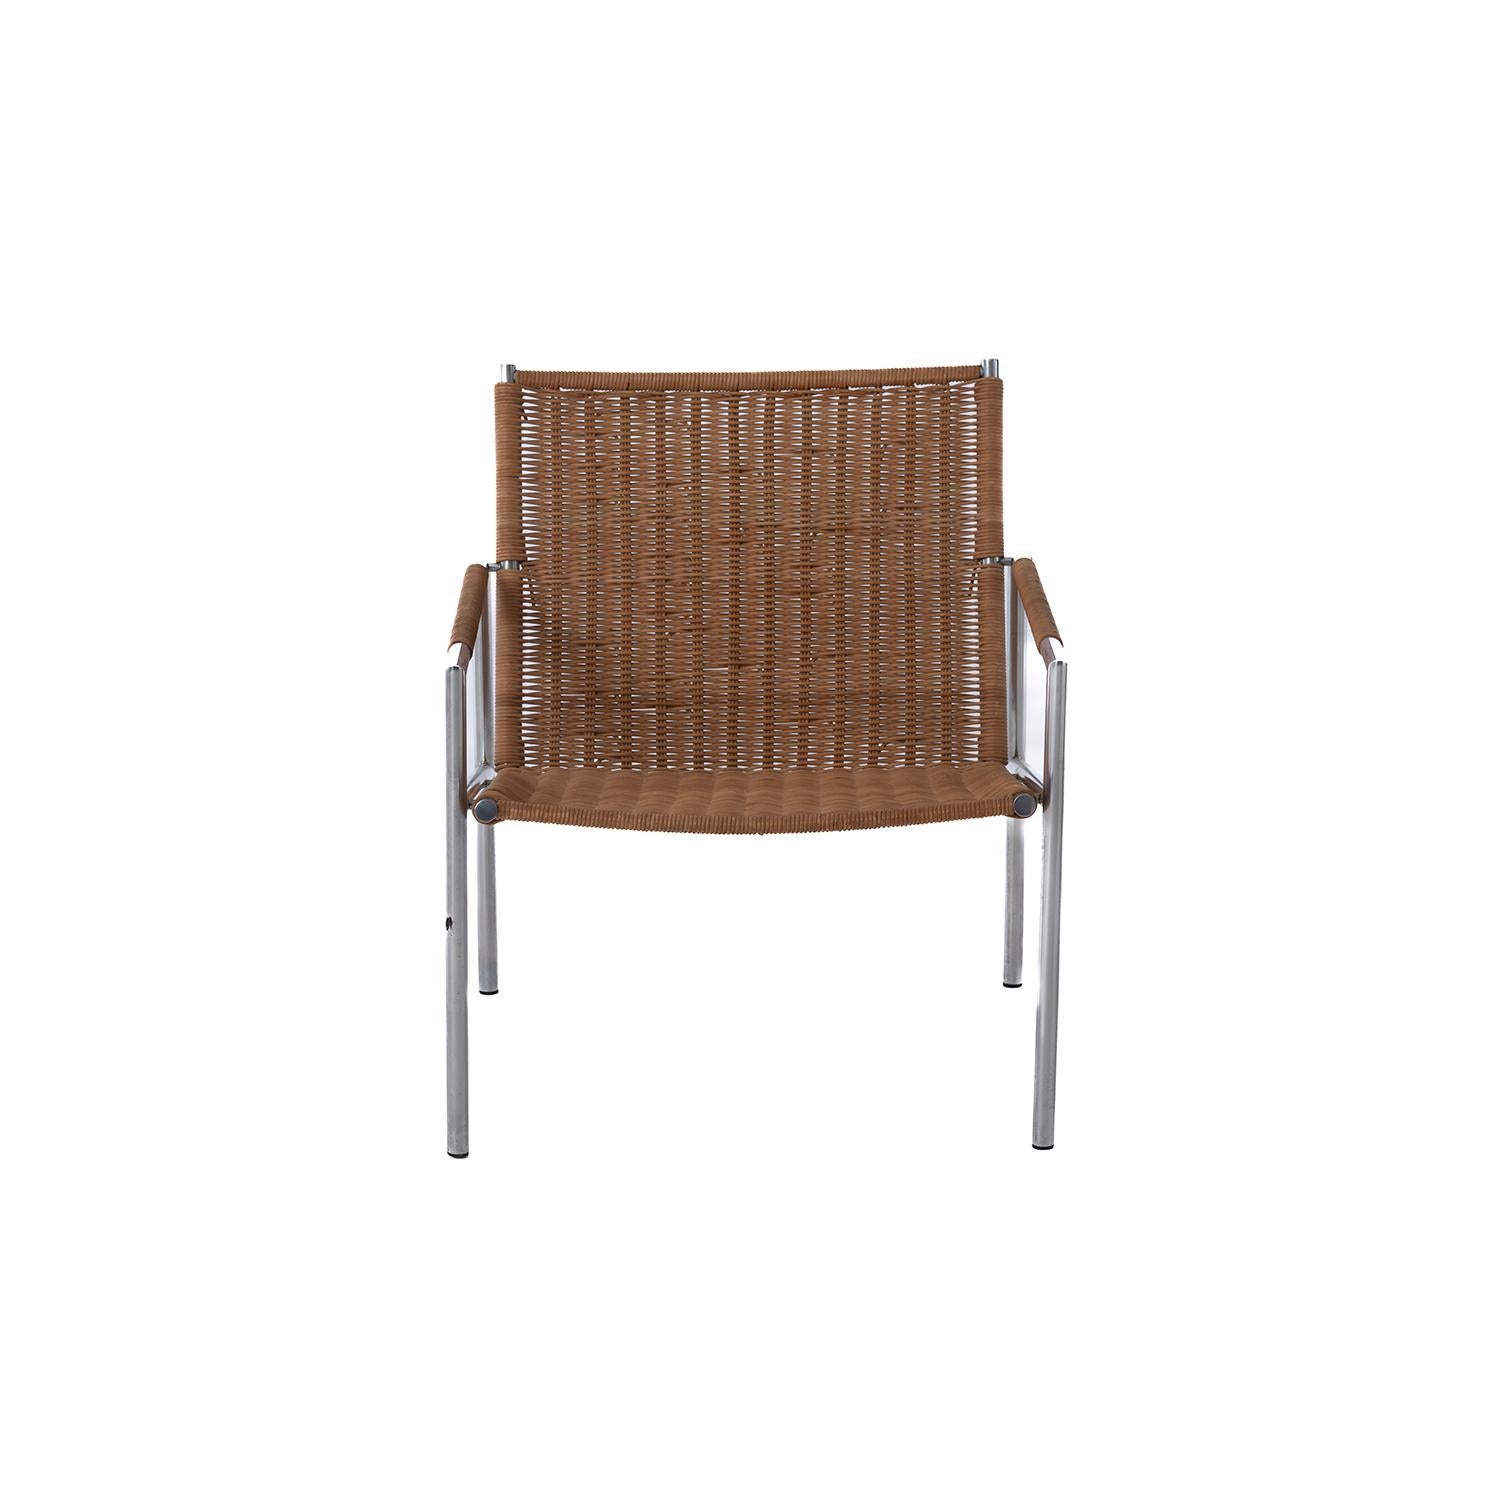 A rare vintage Dutch lounge chair designed by Martin Visser for Spectrum design known as the SZ01. Minimal metal frame with woven rattan seat. Two available. Price is per chair.


Professional, skilled furniture restoration is an integral part of